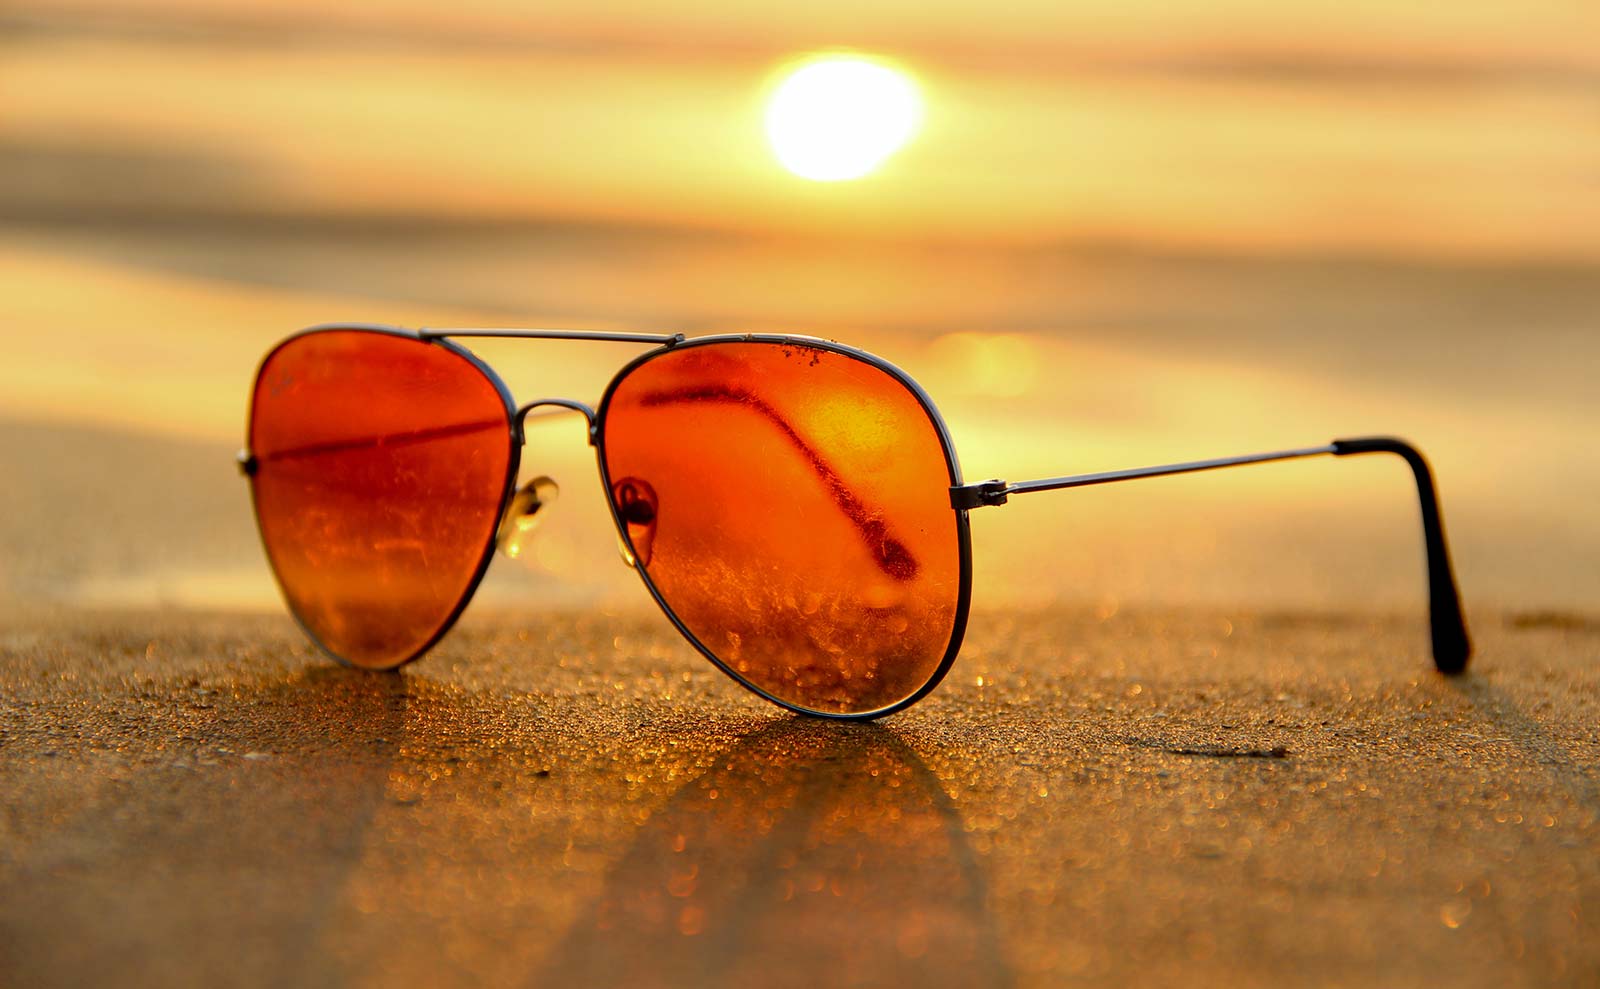 Sunglasses in front of a sunset on a beach in Oléron